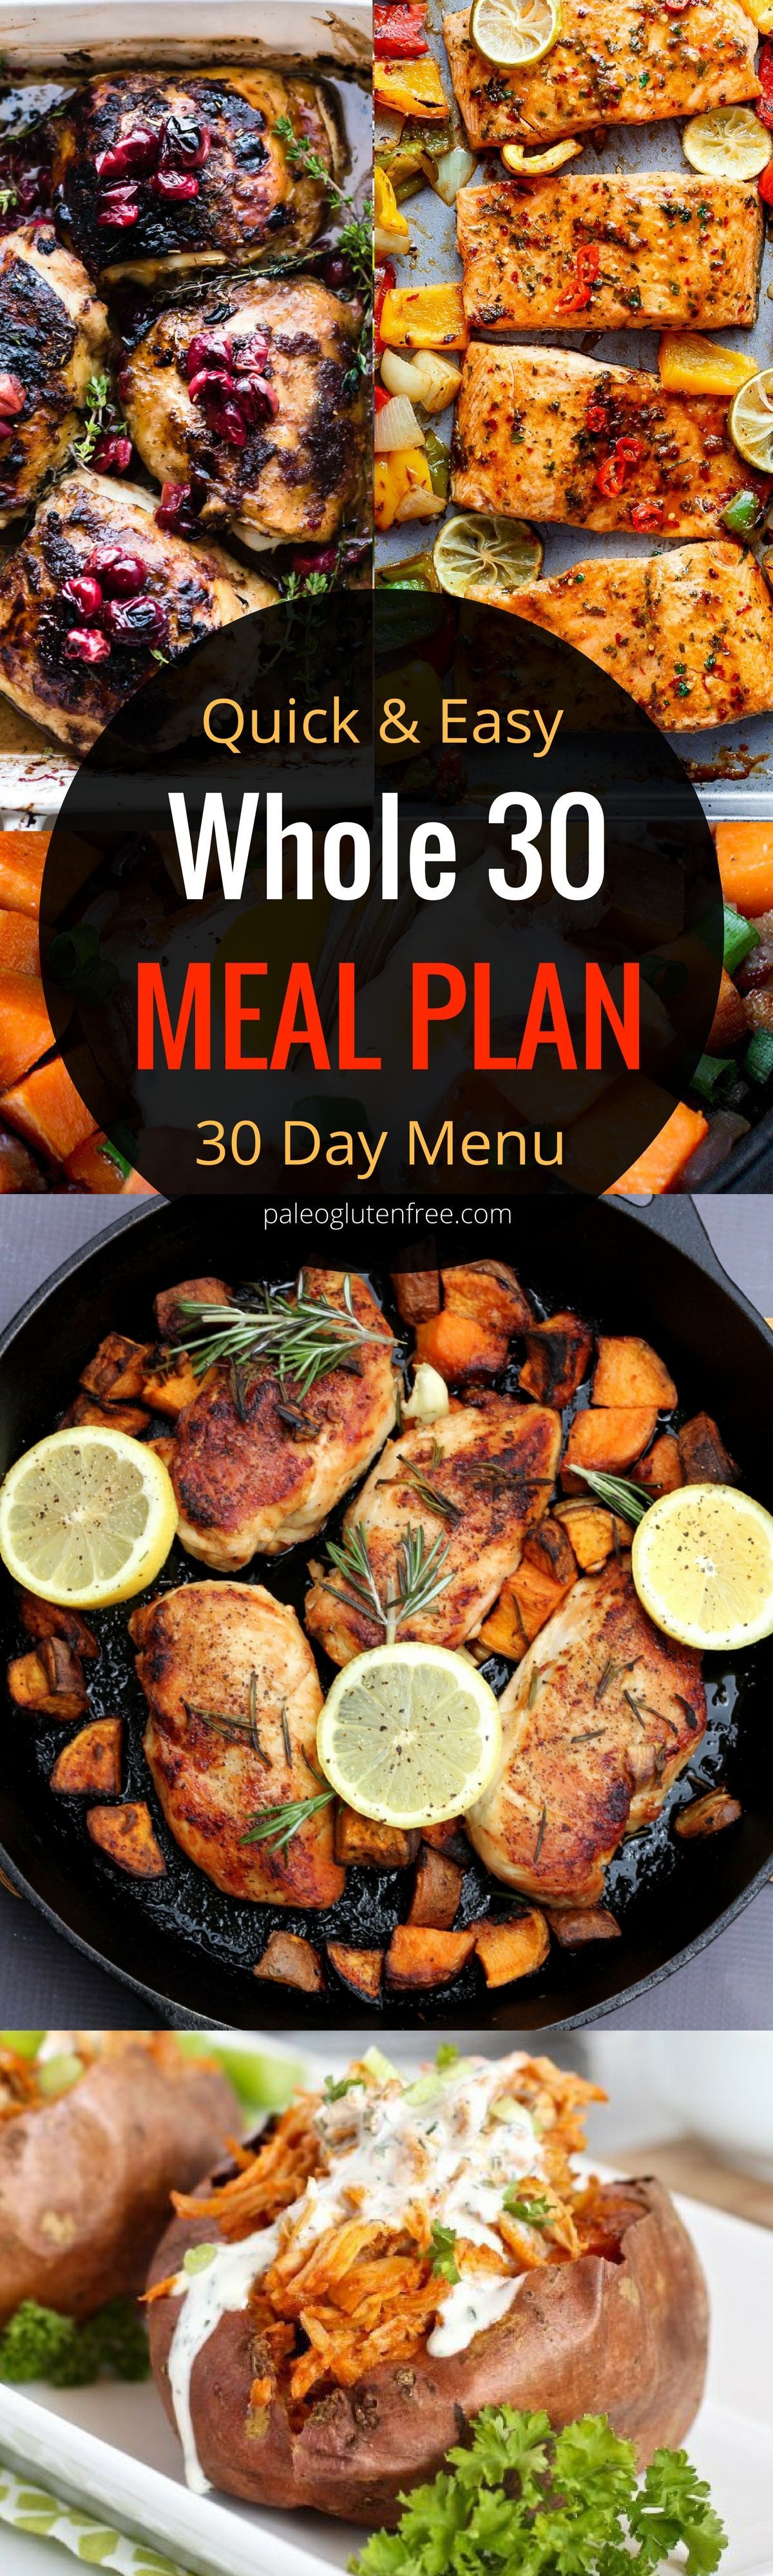 30 days of Whole 30 meals! A complete Whole 30 paleo menu plan. Quick, easy, and delicious meals and tips for eating whole 30